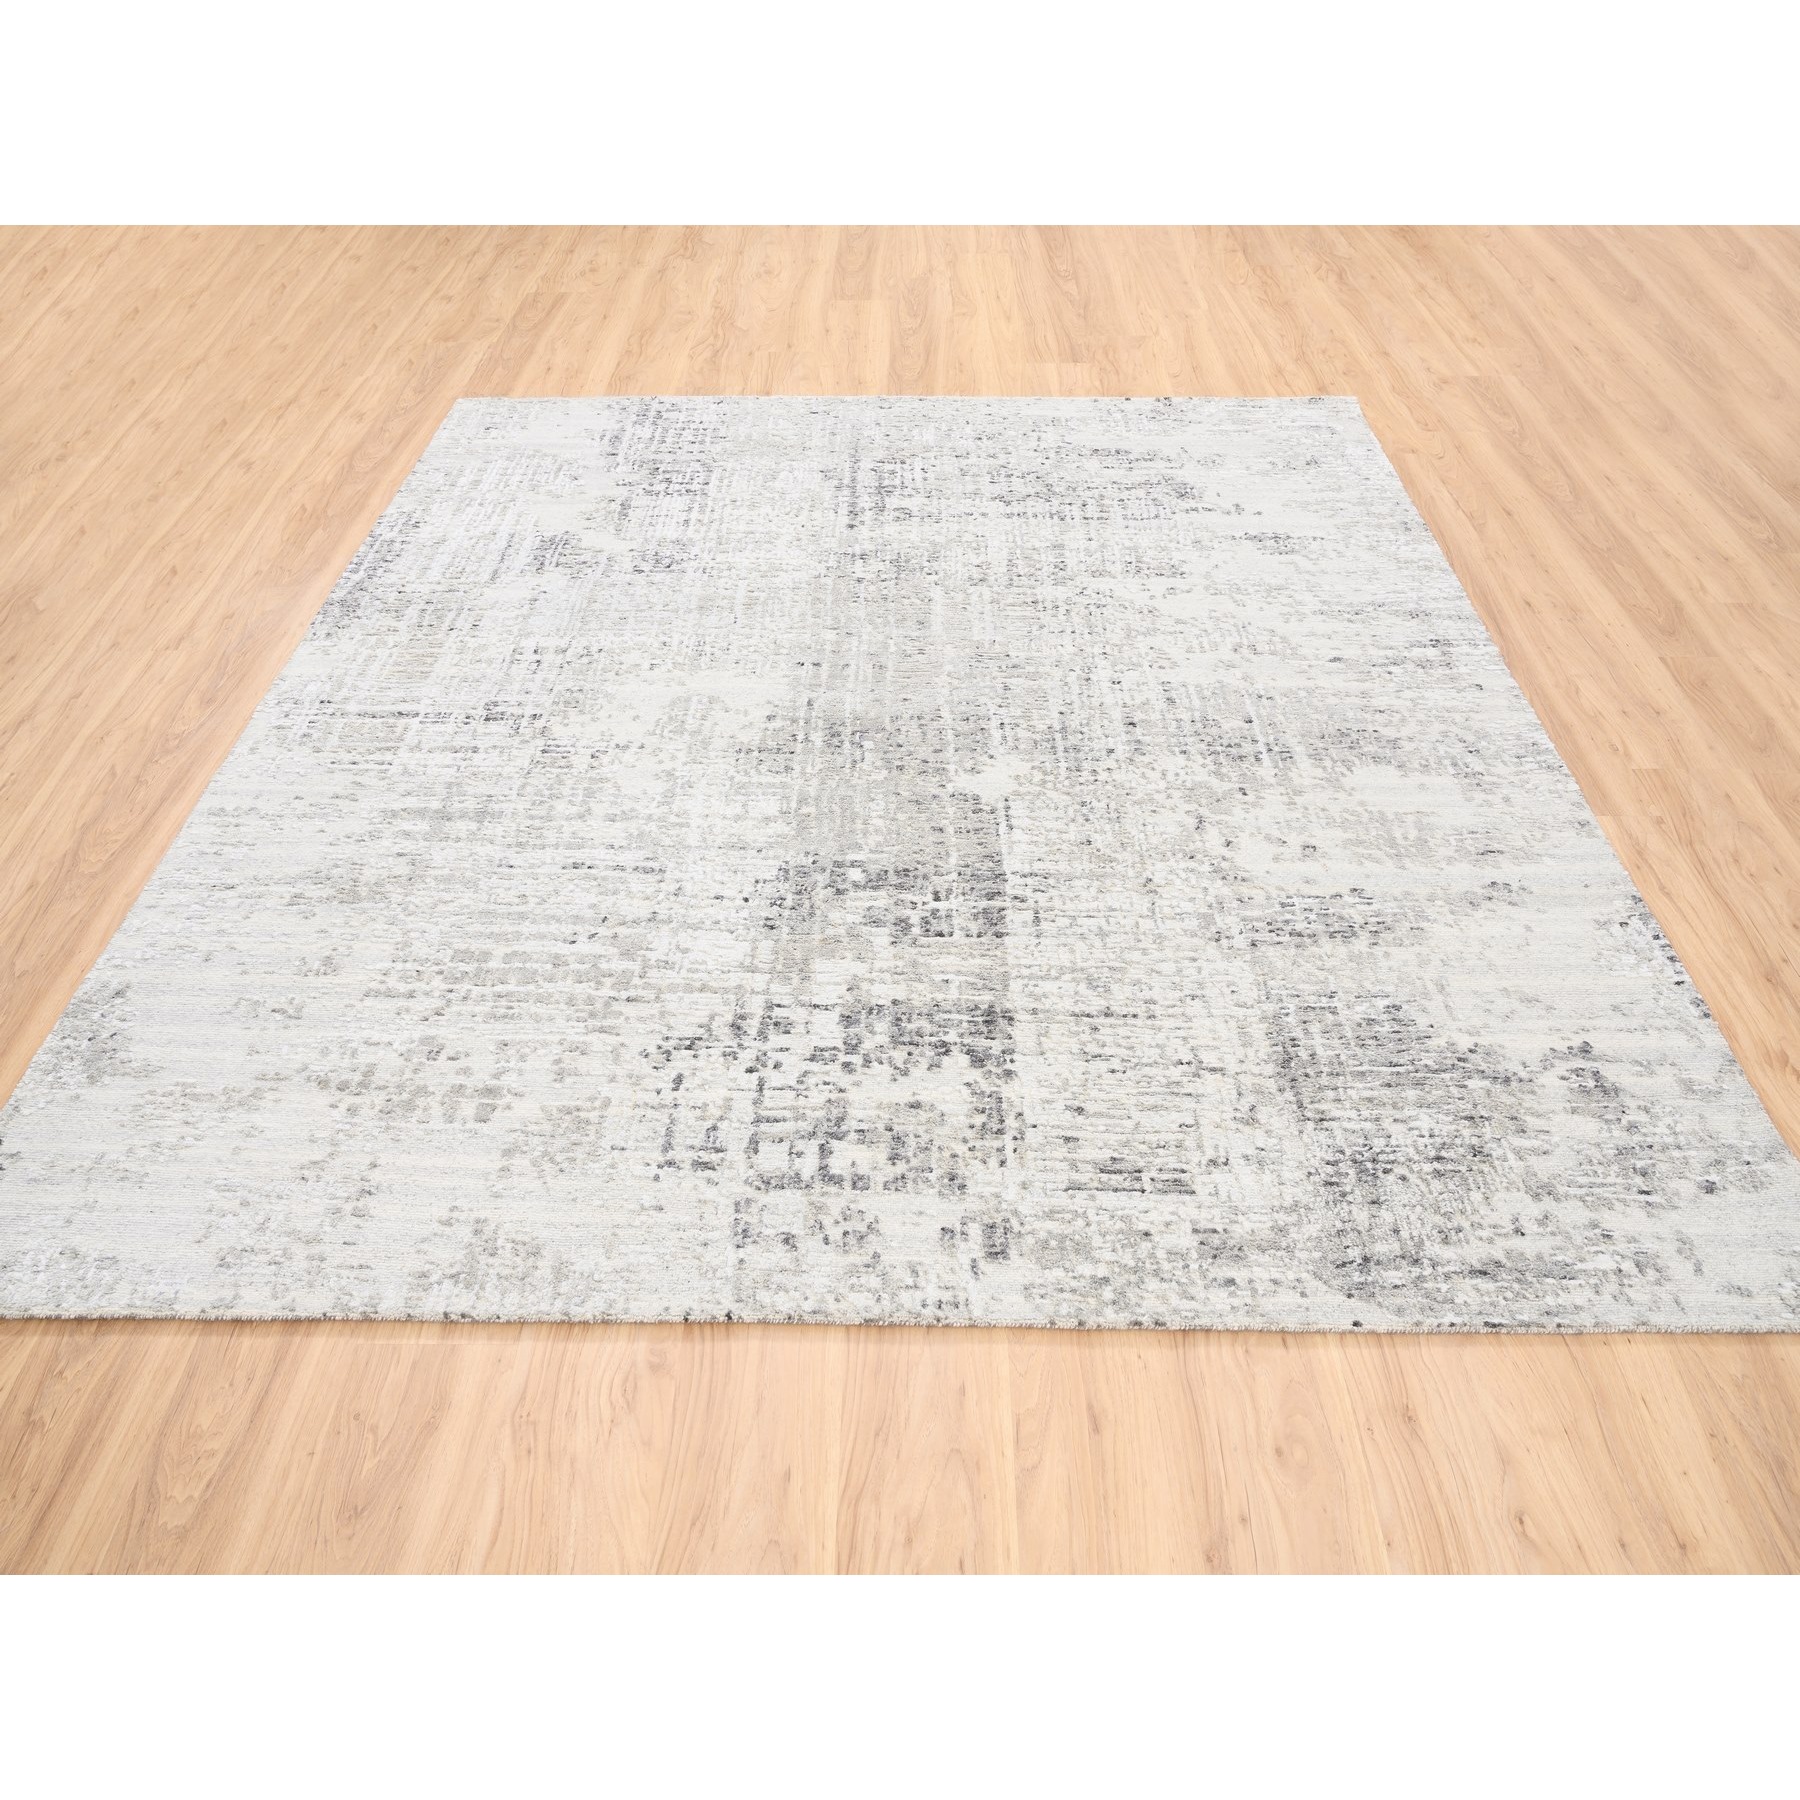 8'x8' Modern Hand Spun Undyed Natural Wool Cut And Loop Pile Hand Woven Light Gray Oriental Square Rug 